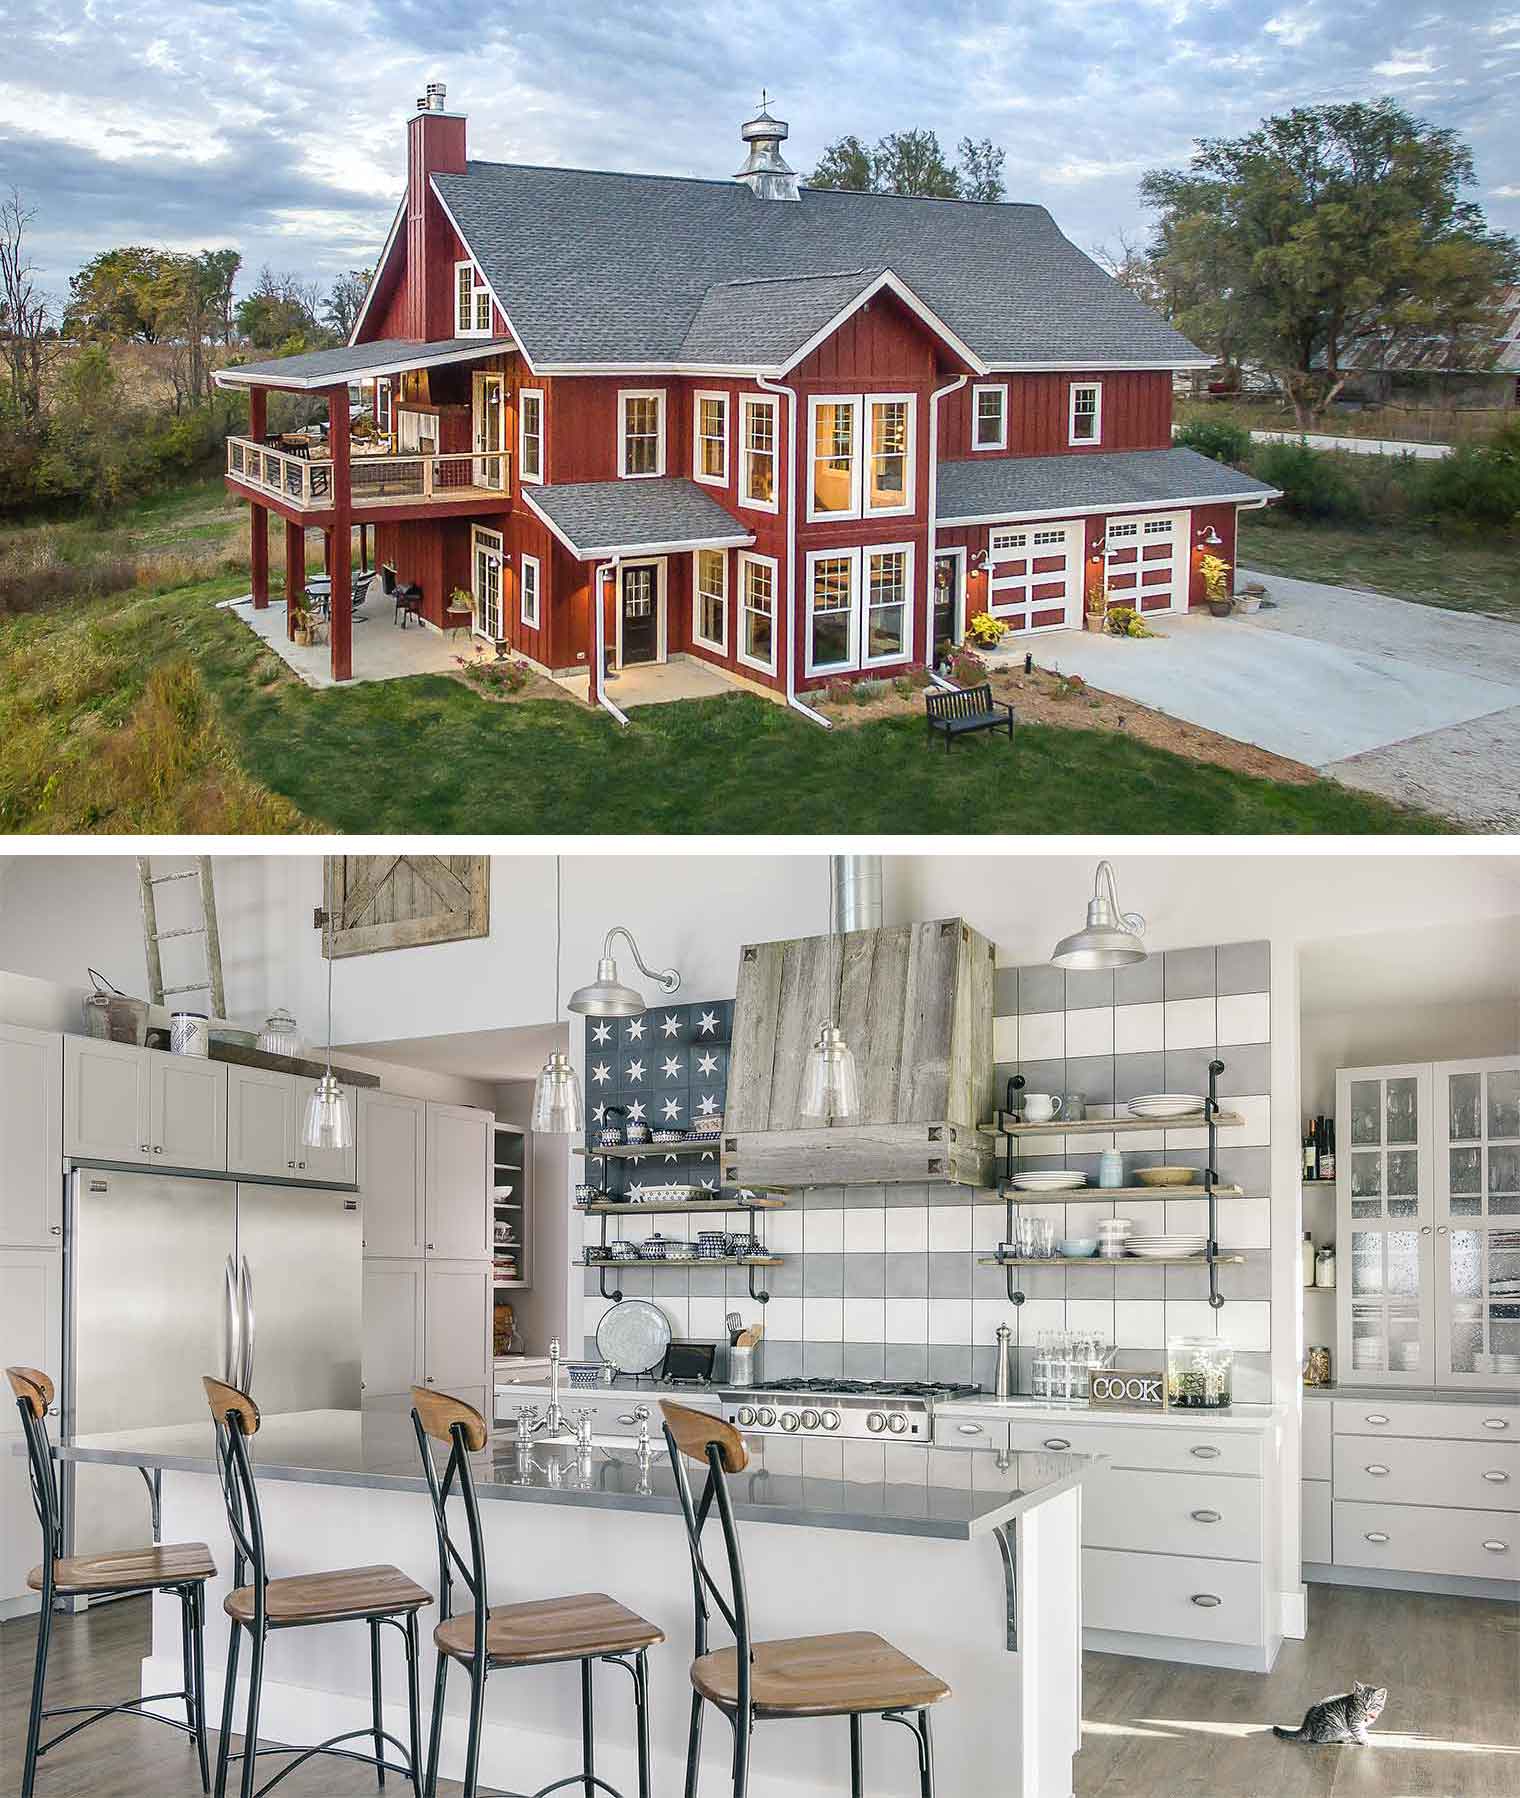 Exterior and kitchen of barn style industrial farmhouse custom new home by designer Tyson Leyendeck and builder Silent Rivers of Des Moines, Iowa